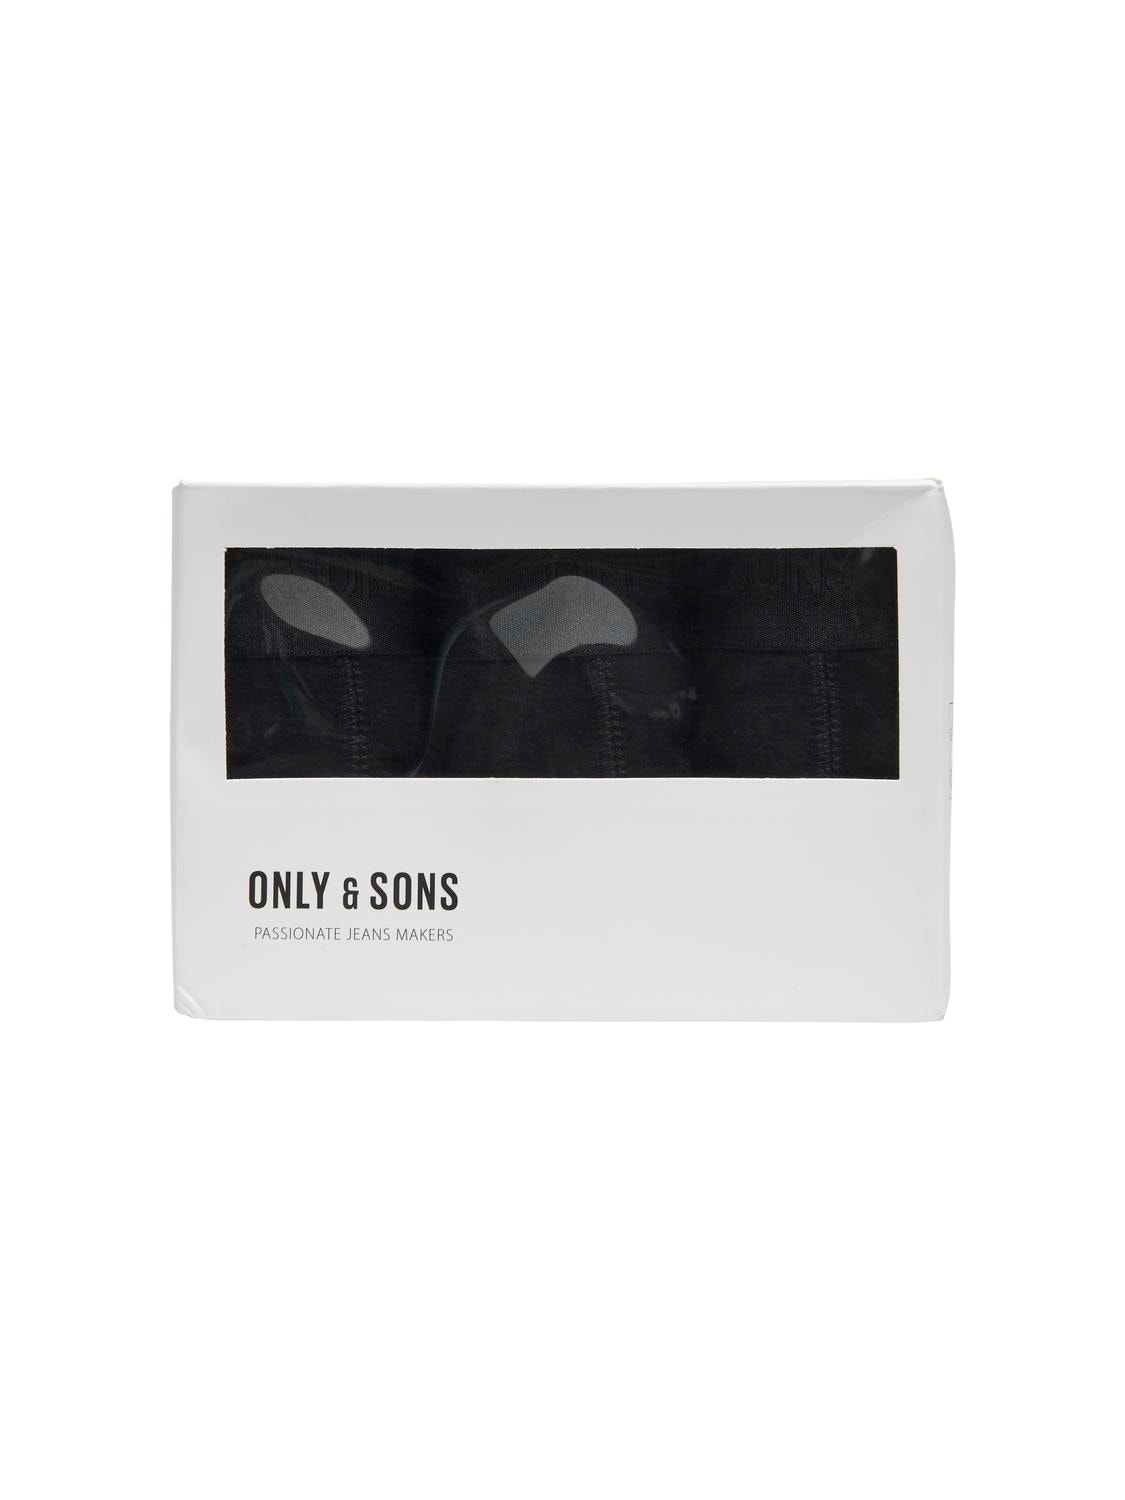 ONLY & SONS Bóxers -Black - 22028589